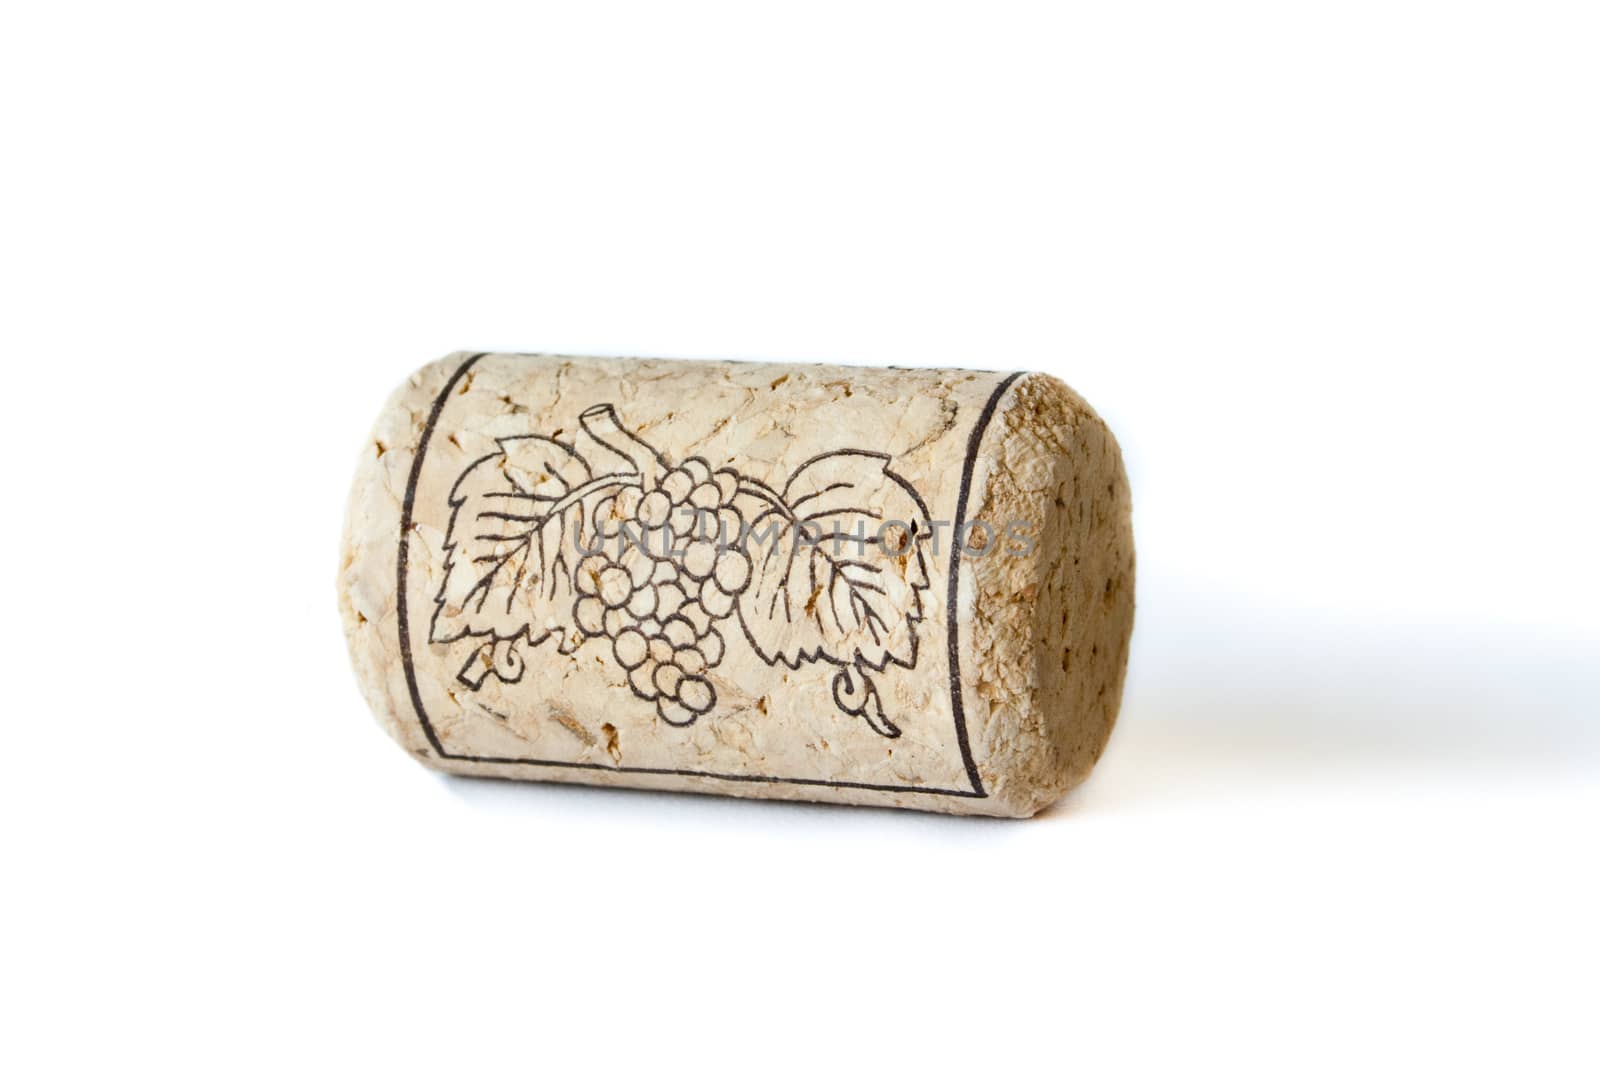 Wine corks on a white background